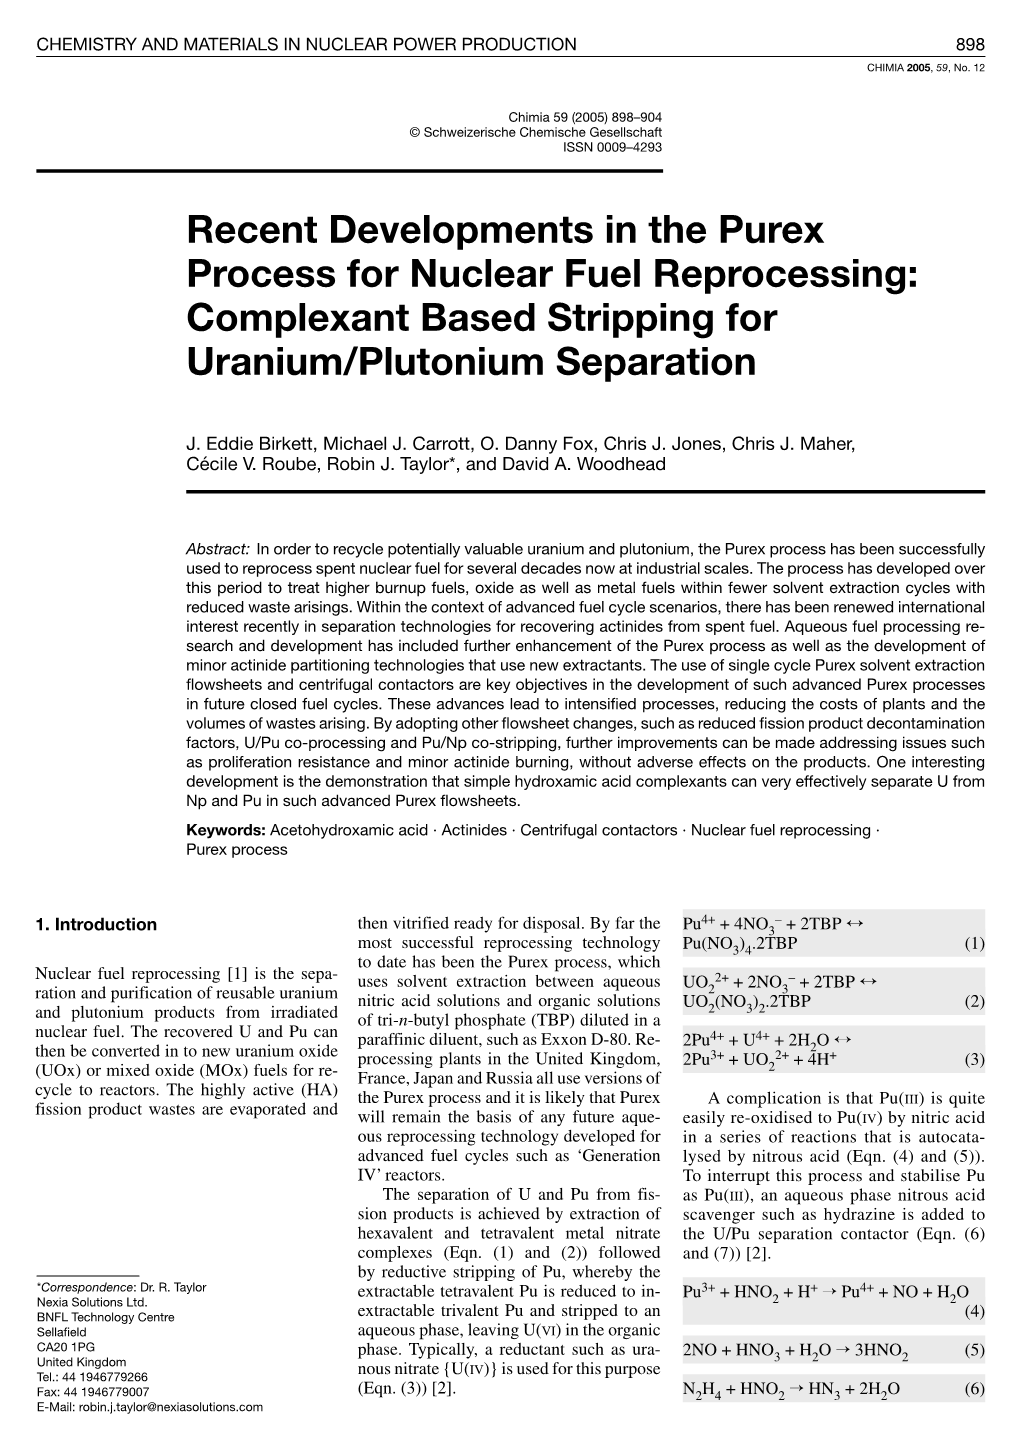 Recent Developments in the Purex Process for Nuclear Fuel Reprocessing: Complexant Based Stripping for Uranium/Plutonium Separation